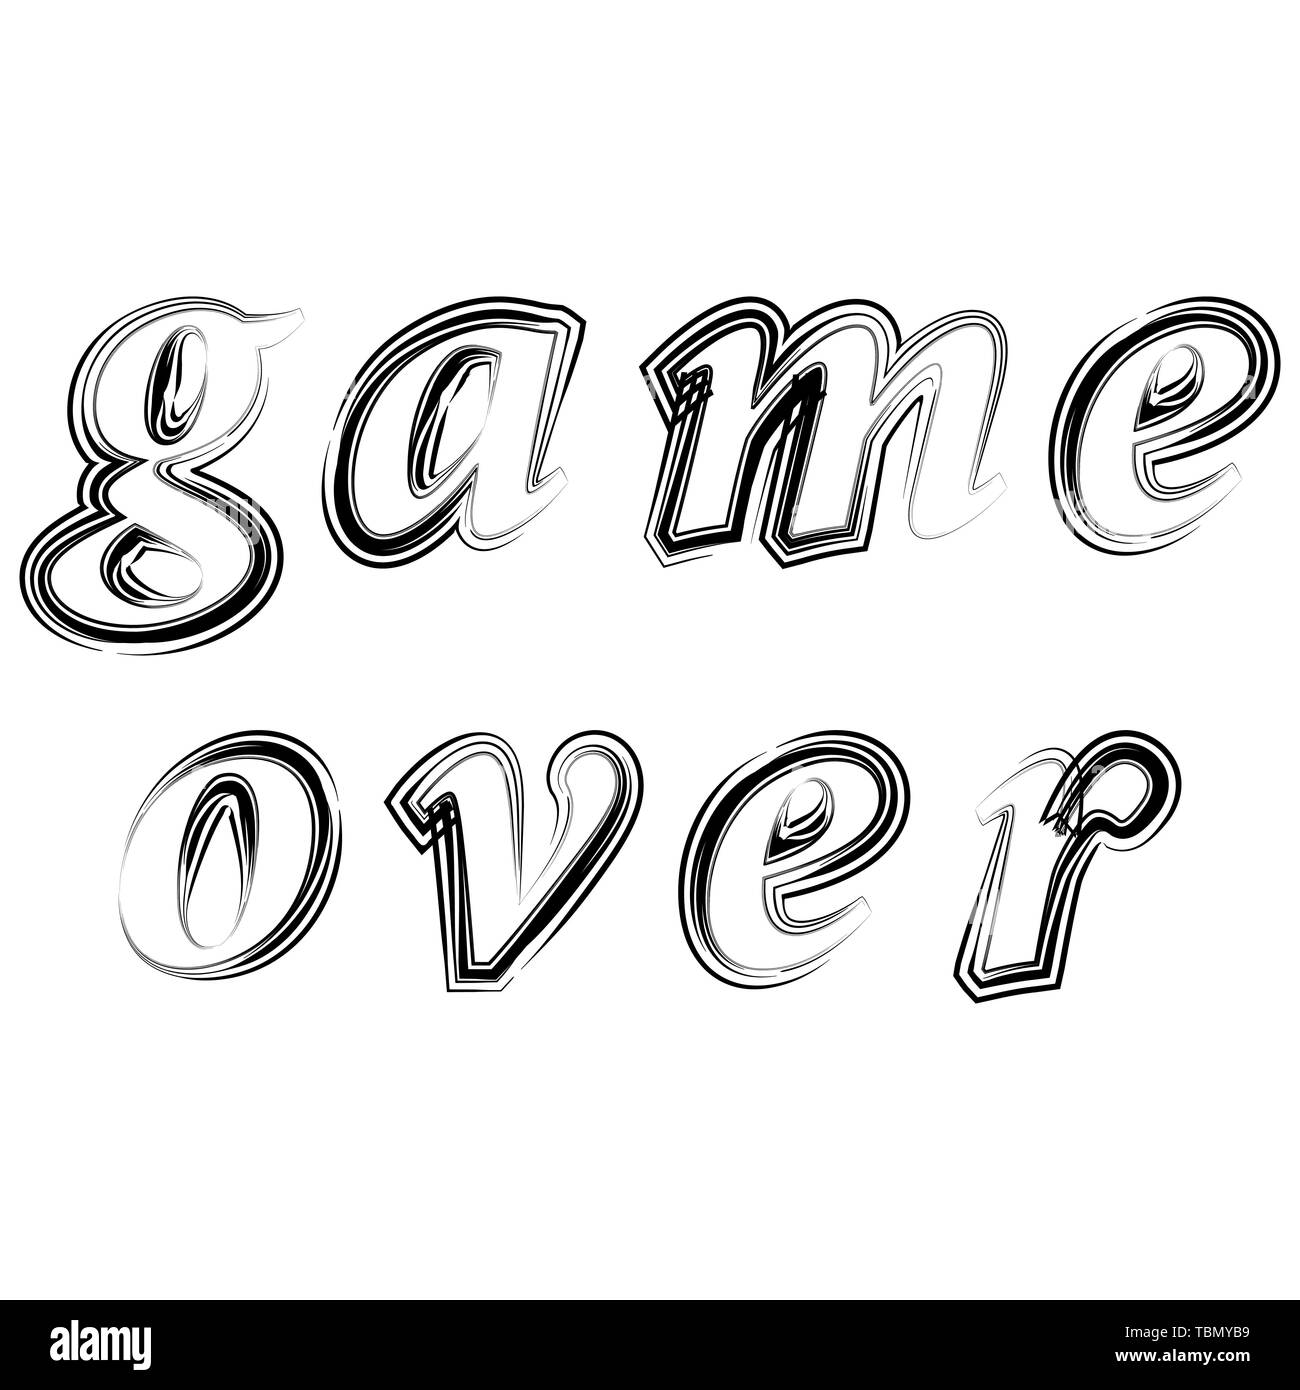 Ink Grunge Game Over Sign. Gaming Concept. Video Game Screen. Typography Design Poster with Lettering Stock Vector